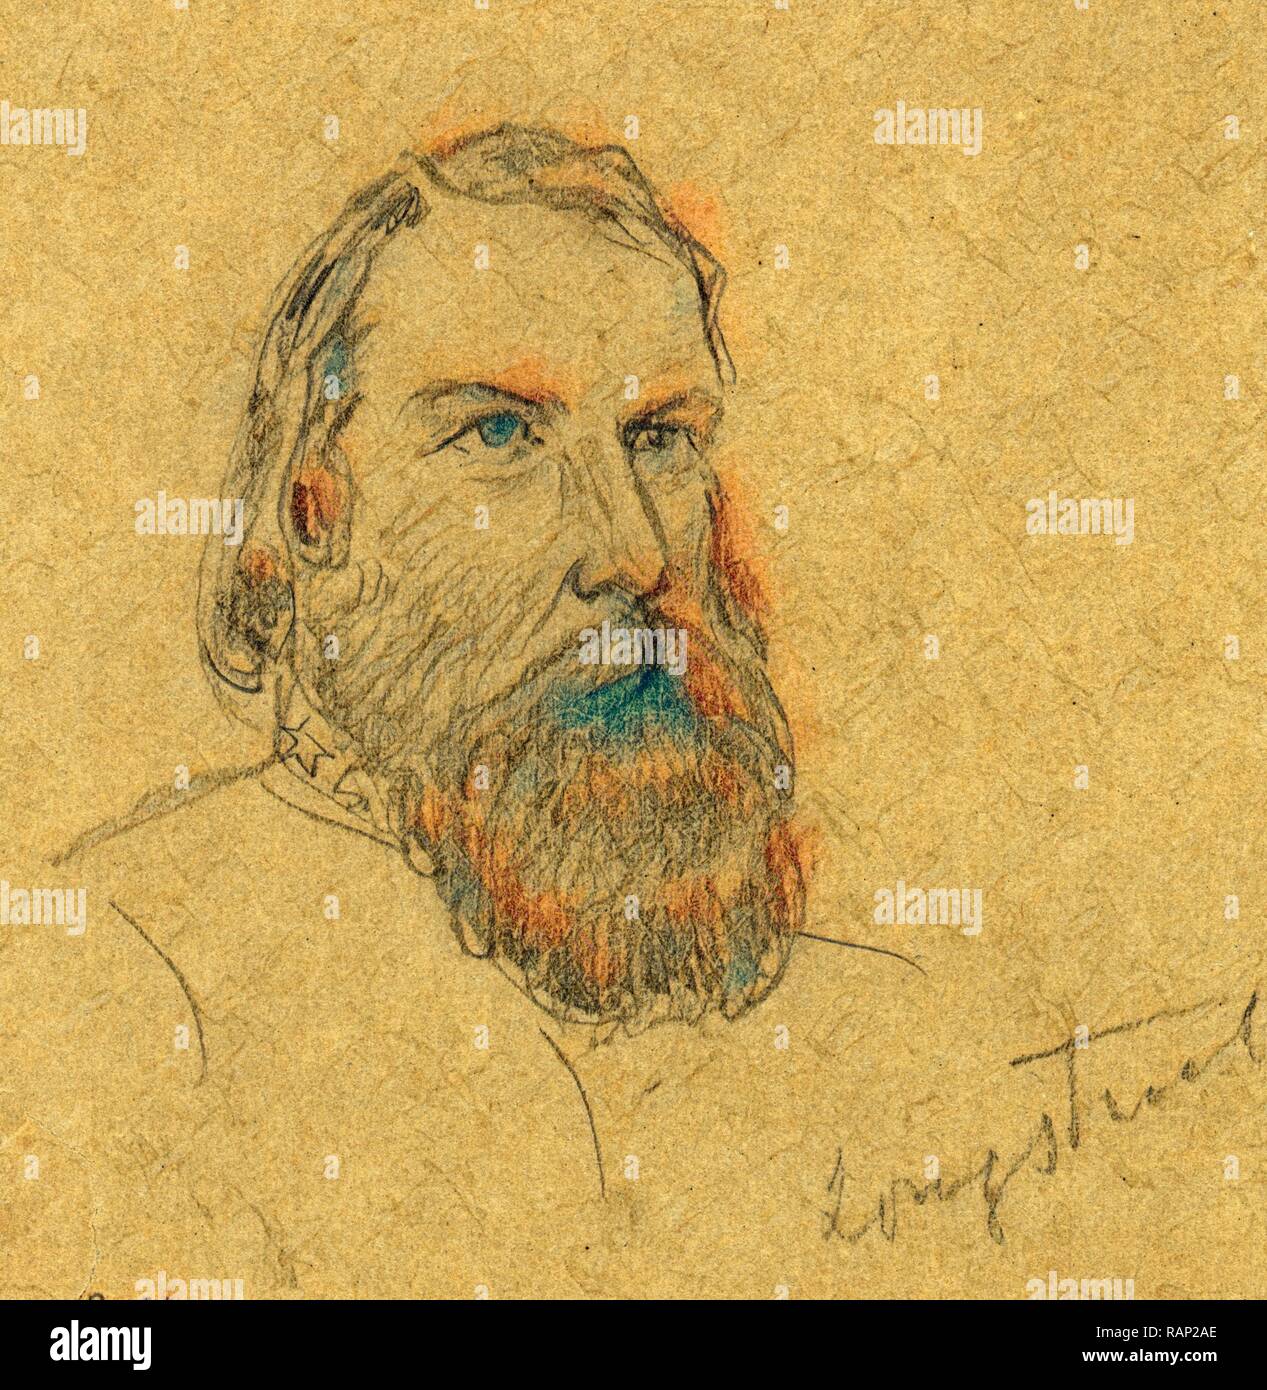 Confederate General James Longstreet, 1861-1865, drawing, 1862-1865, by Alfred R Waud, 1828-1891, an american artist reimagined Stock Photo